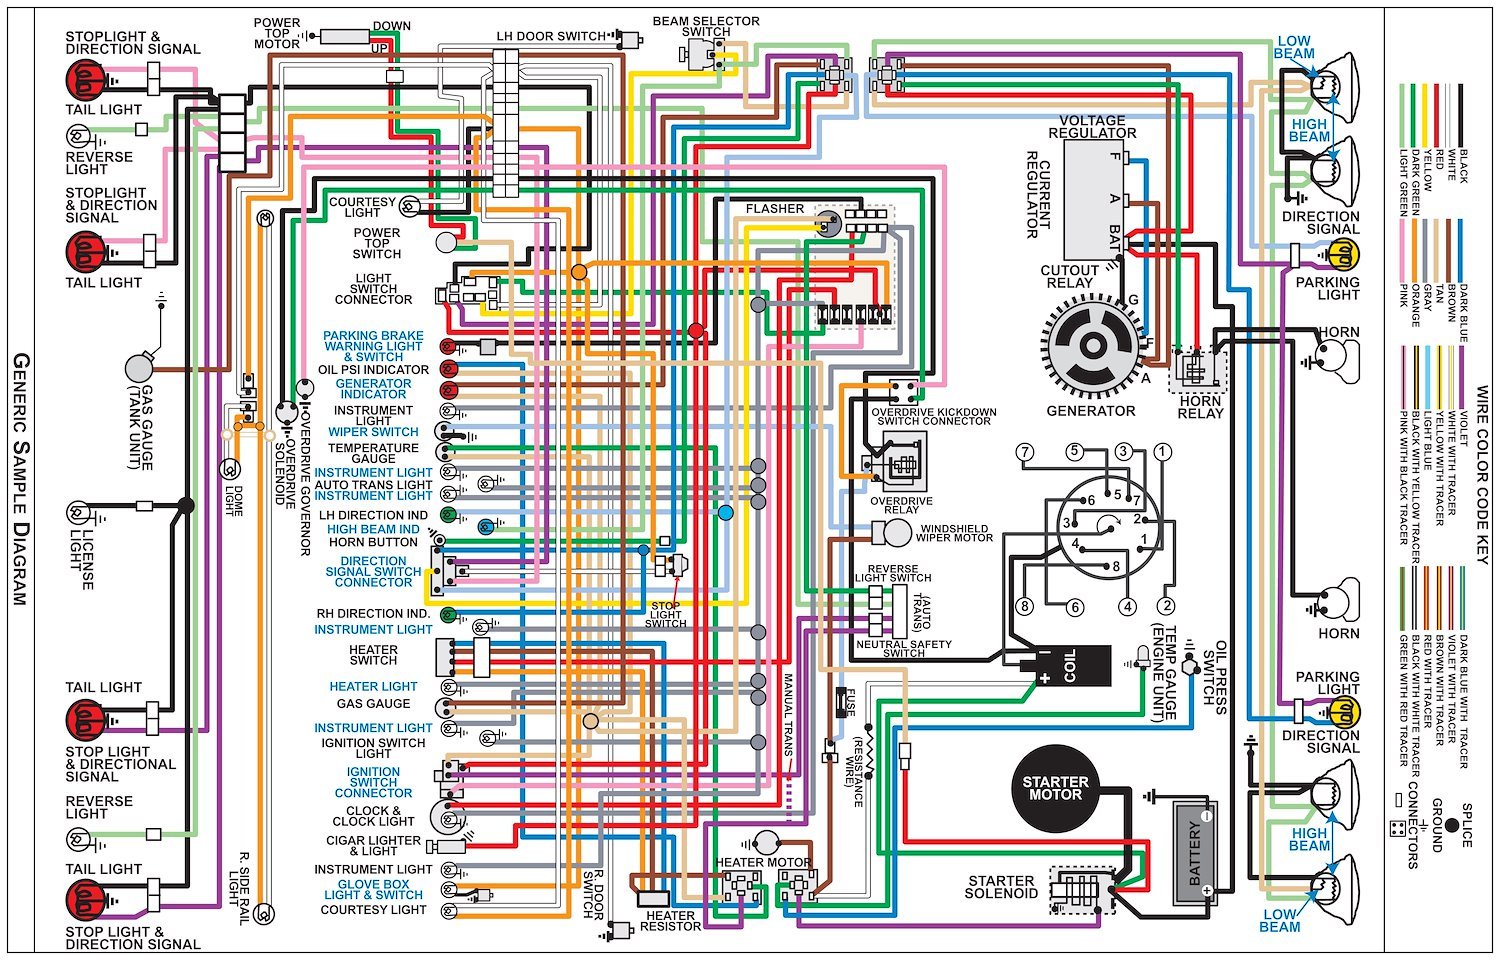 Wiring Diagram for 1952 Chevy Car, 11 in.